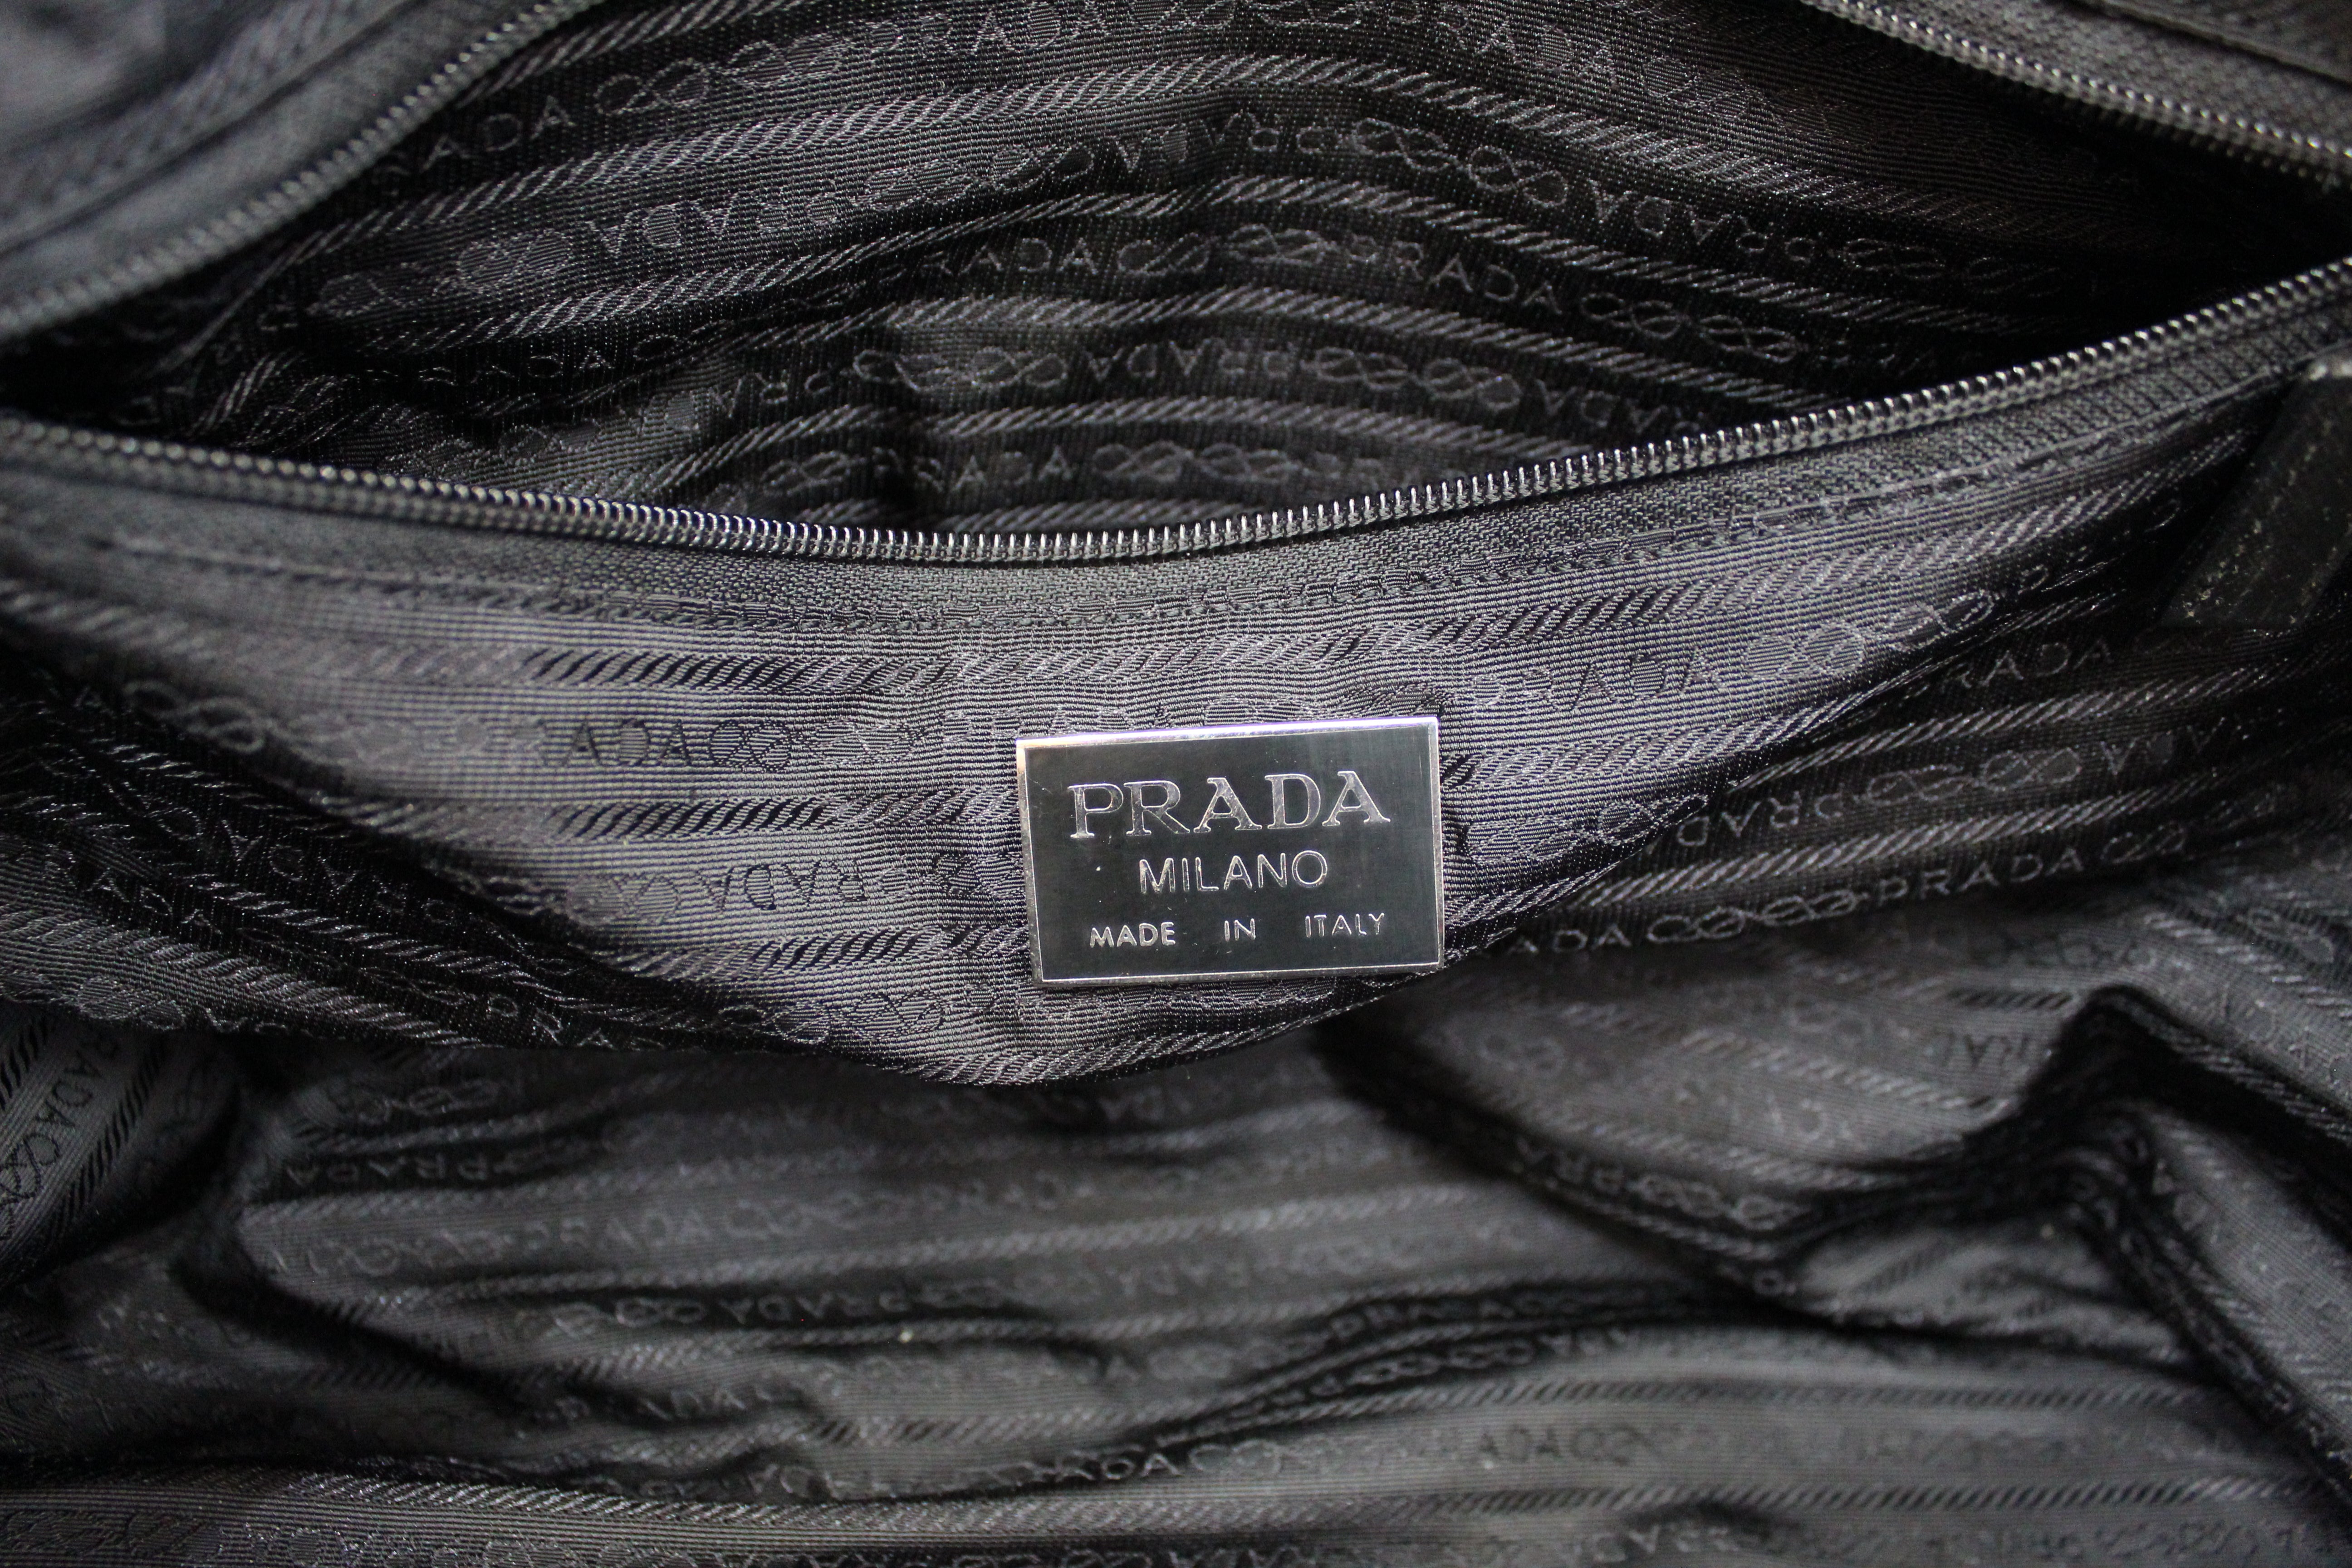 Authentic Prada Black Nylon and Saffiano Leather Duffle Travel Carry On Bag